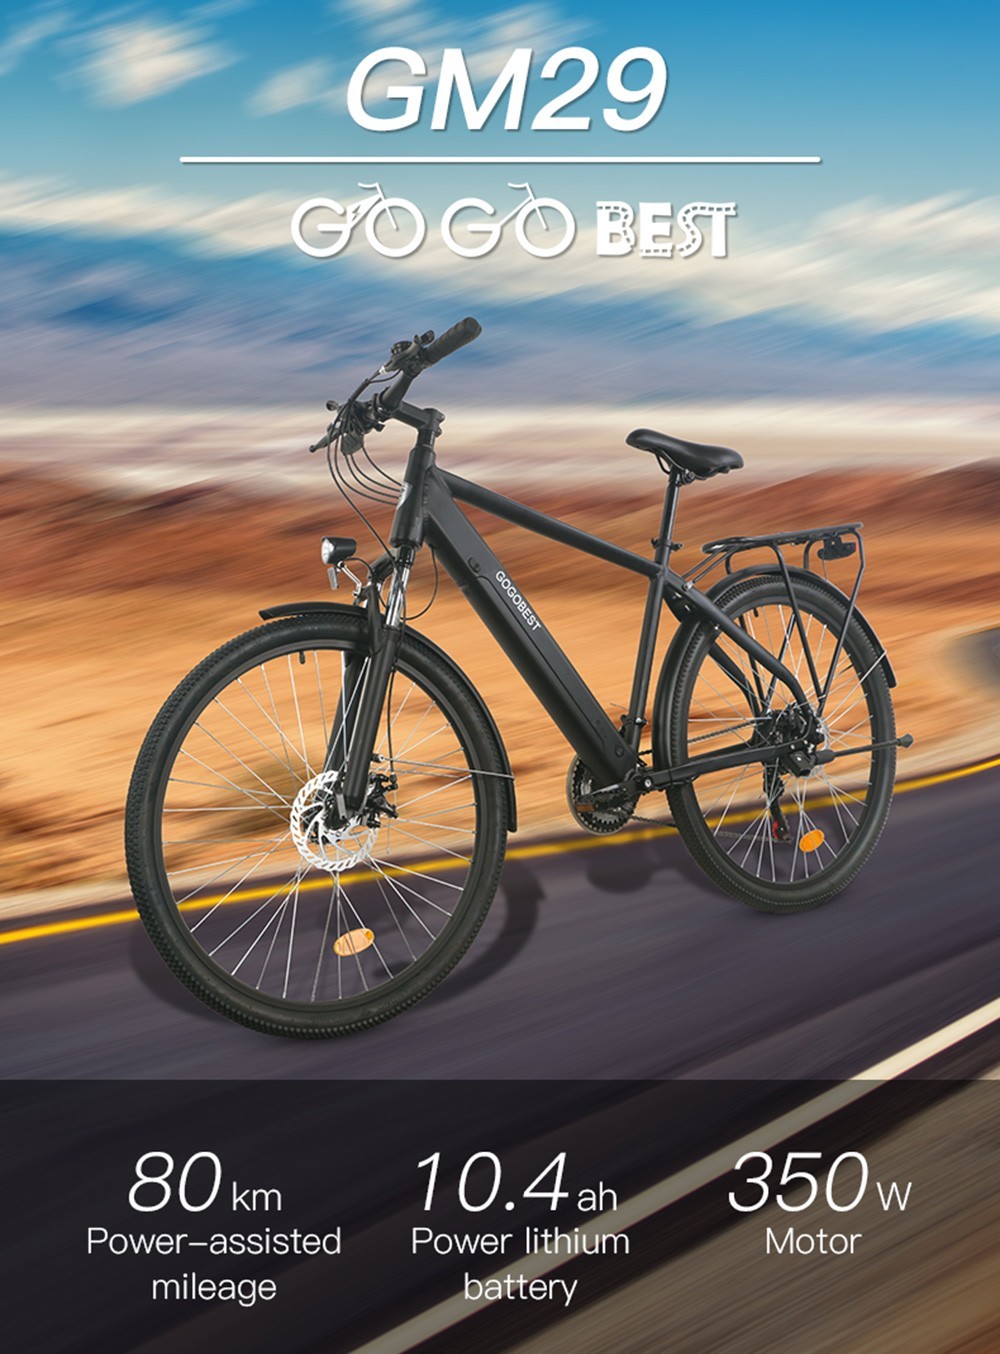 GOGOBEST GM29 Electric Bike 36V 350W Motor 32km/h - Get it for 846€ with Coupon at GEEKBUYING